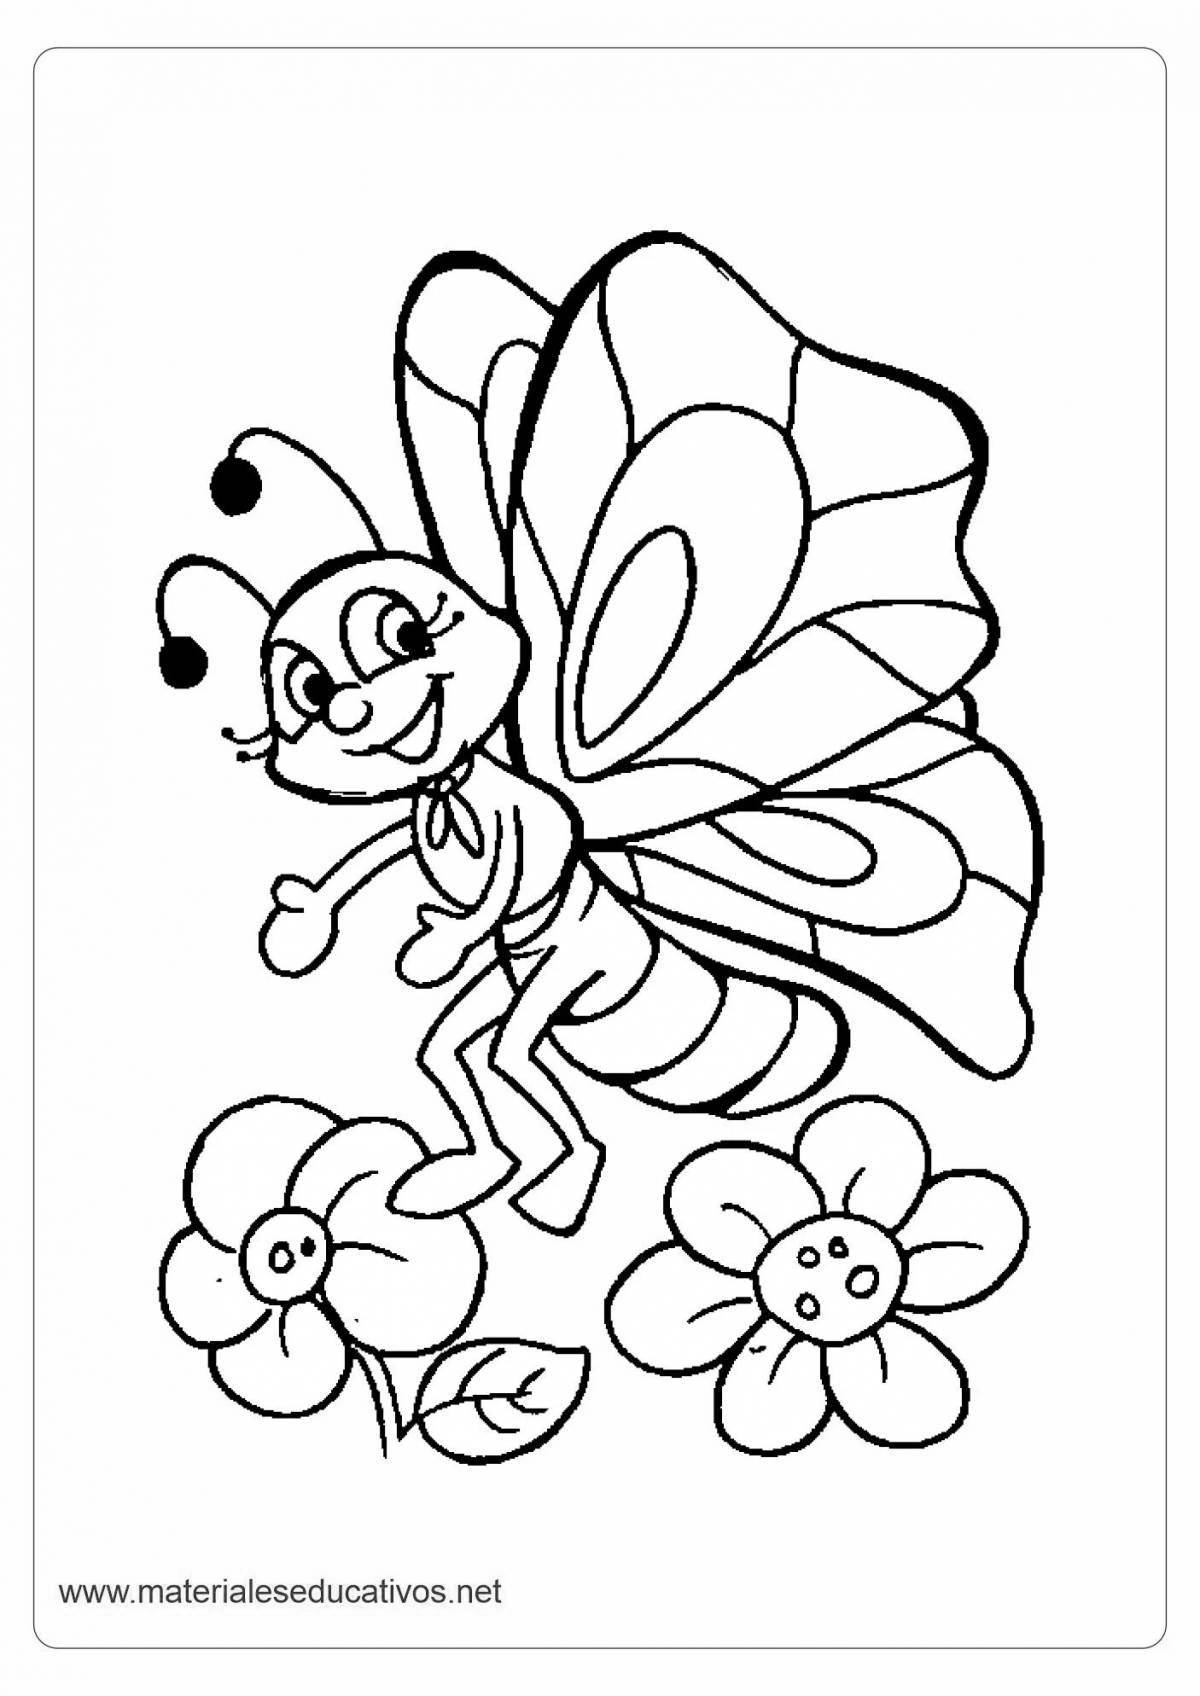 Cute flower coloring book for girls